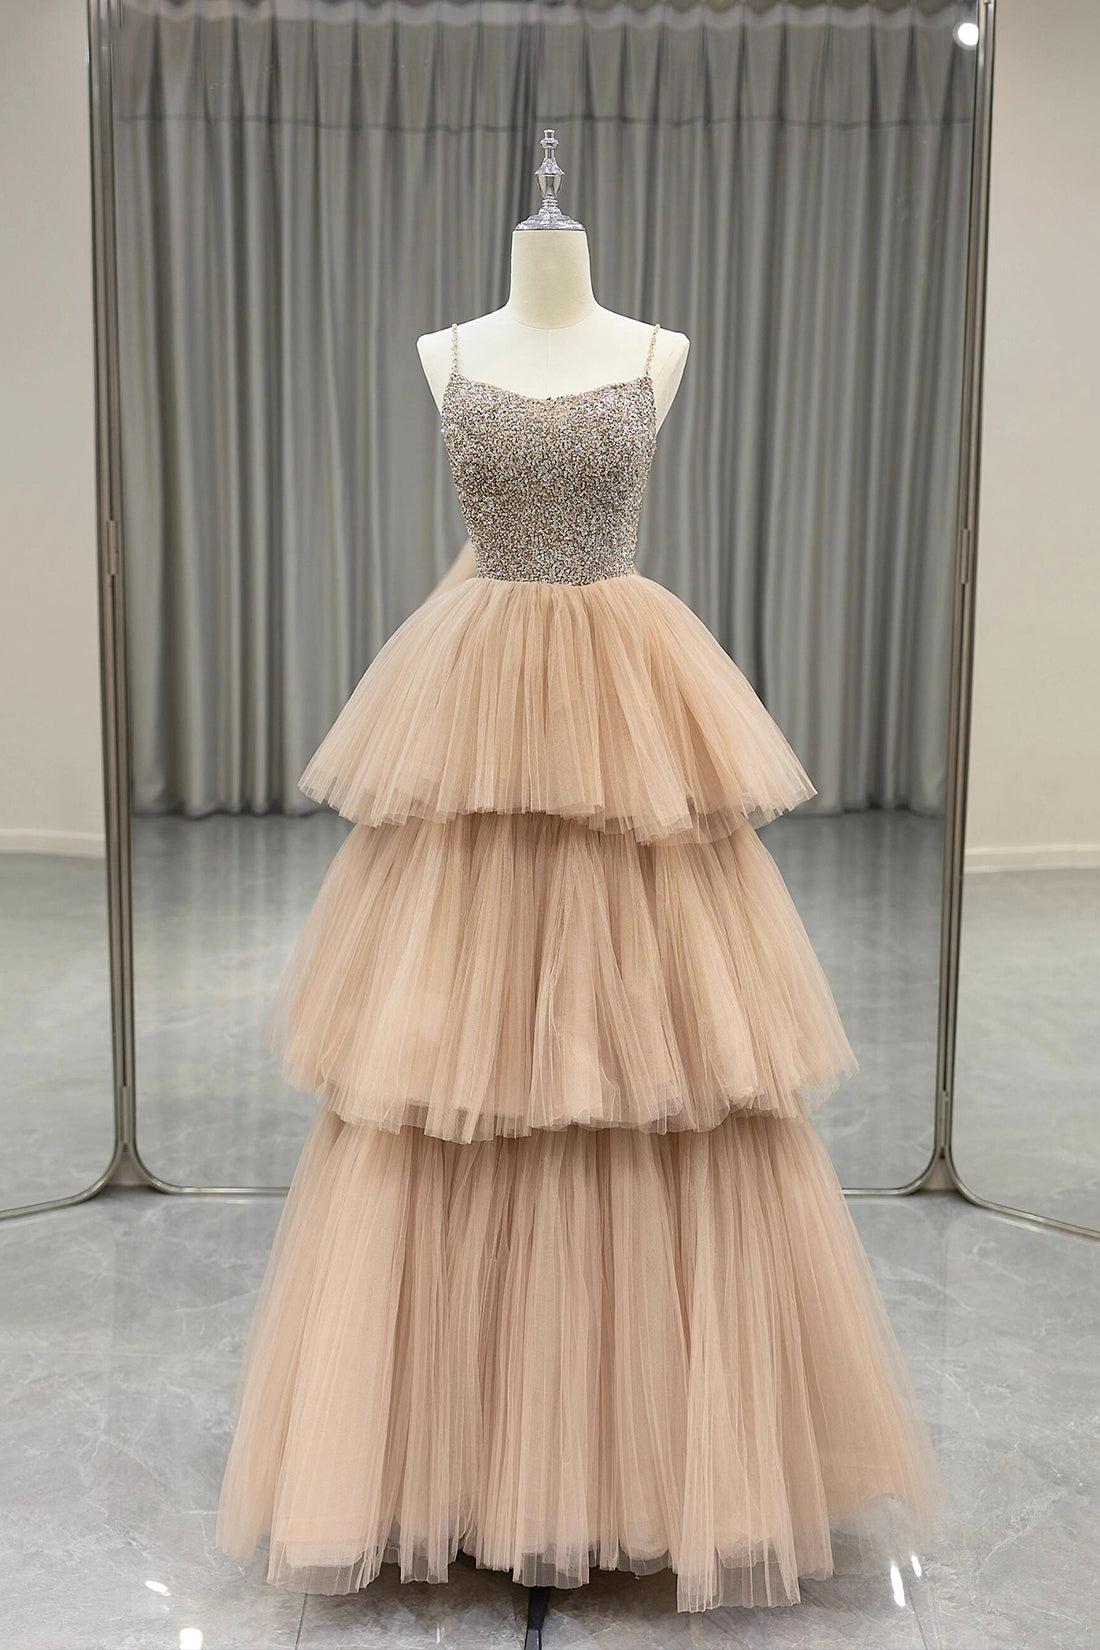 Champagne Tulle Layers Long A-Line Prom Dress, Spaghetti Strap Beaded Evening Dress